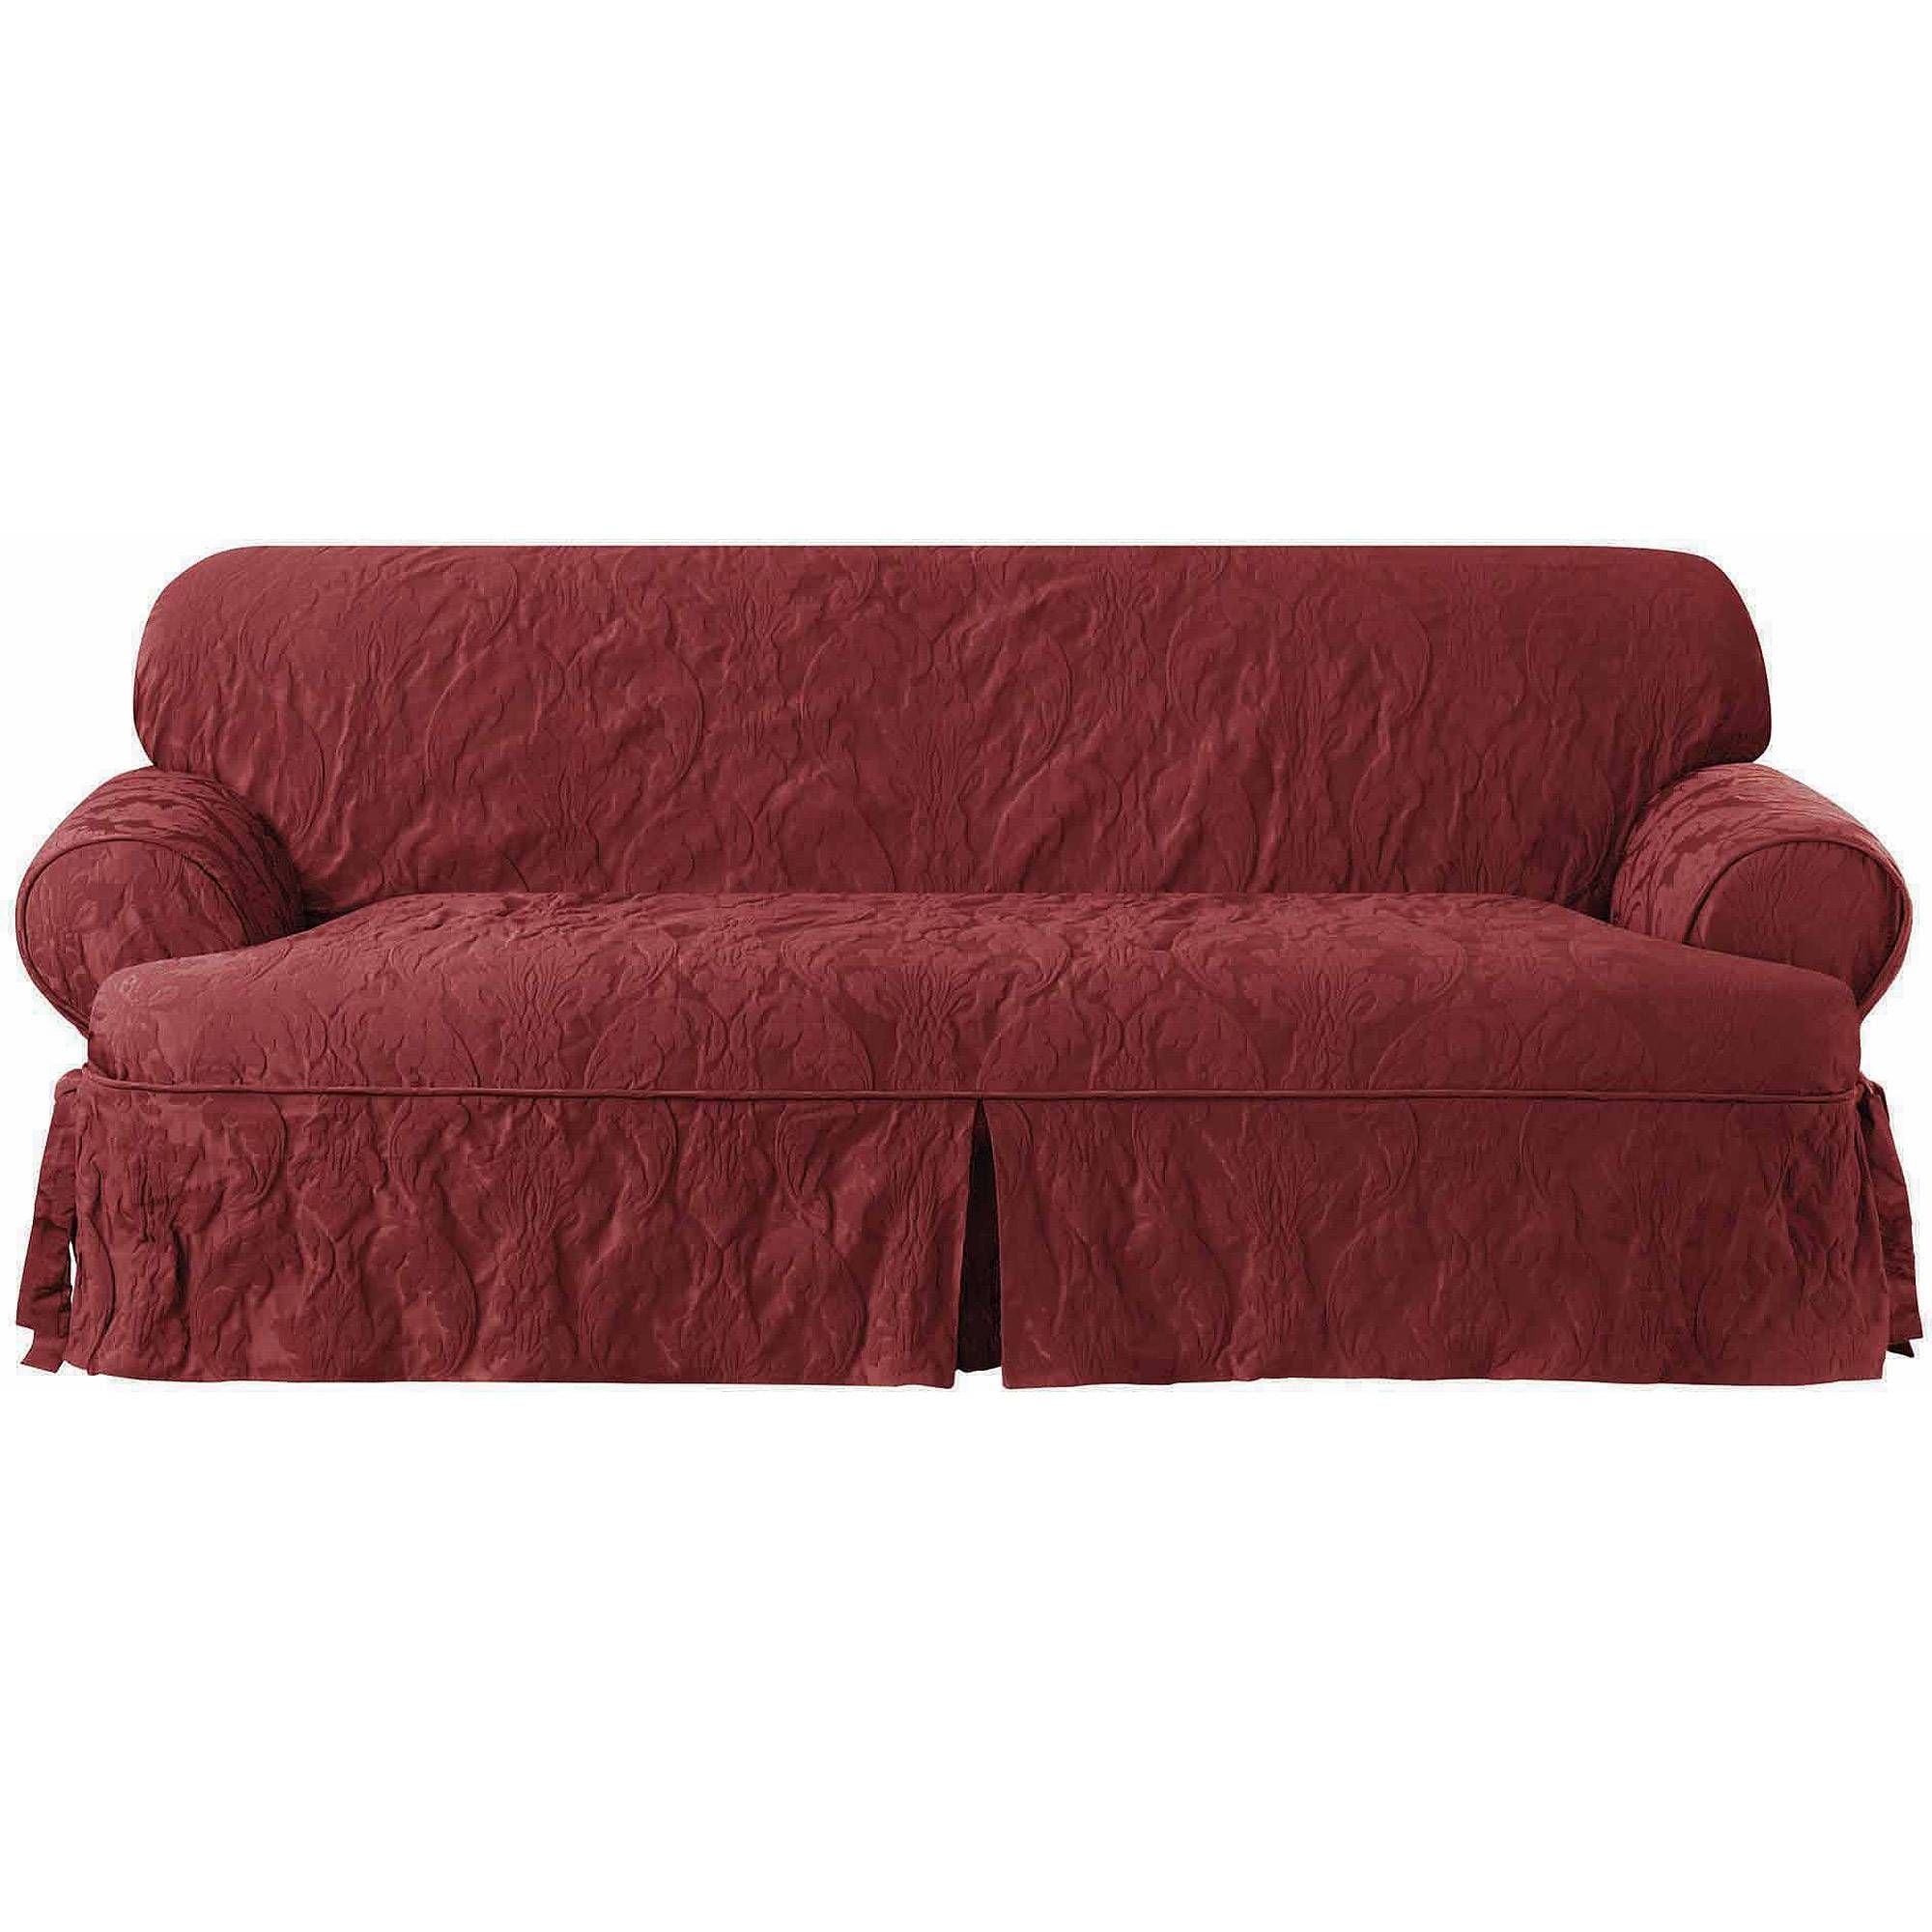 Sure Fit Sofa Slipcovers In 3 Piece Sofa Slipcovers (View 1 of 15)